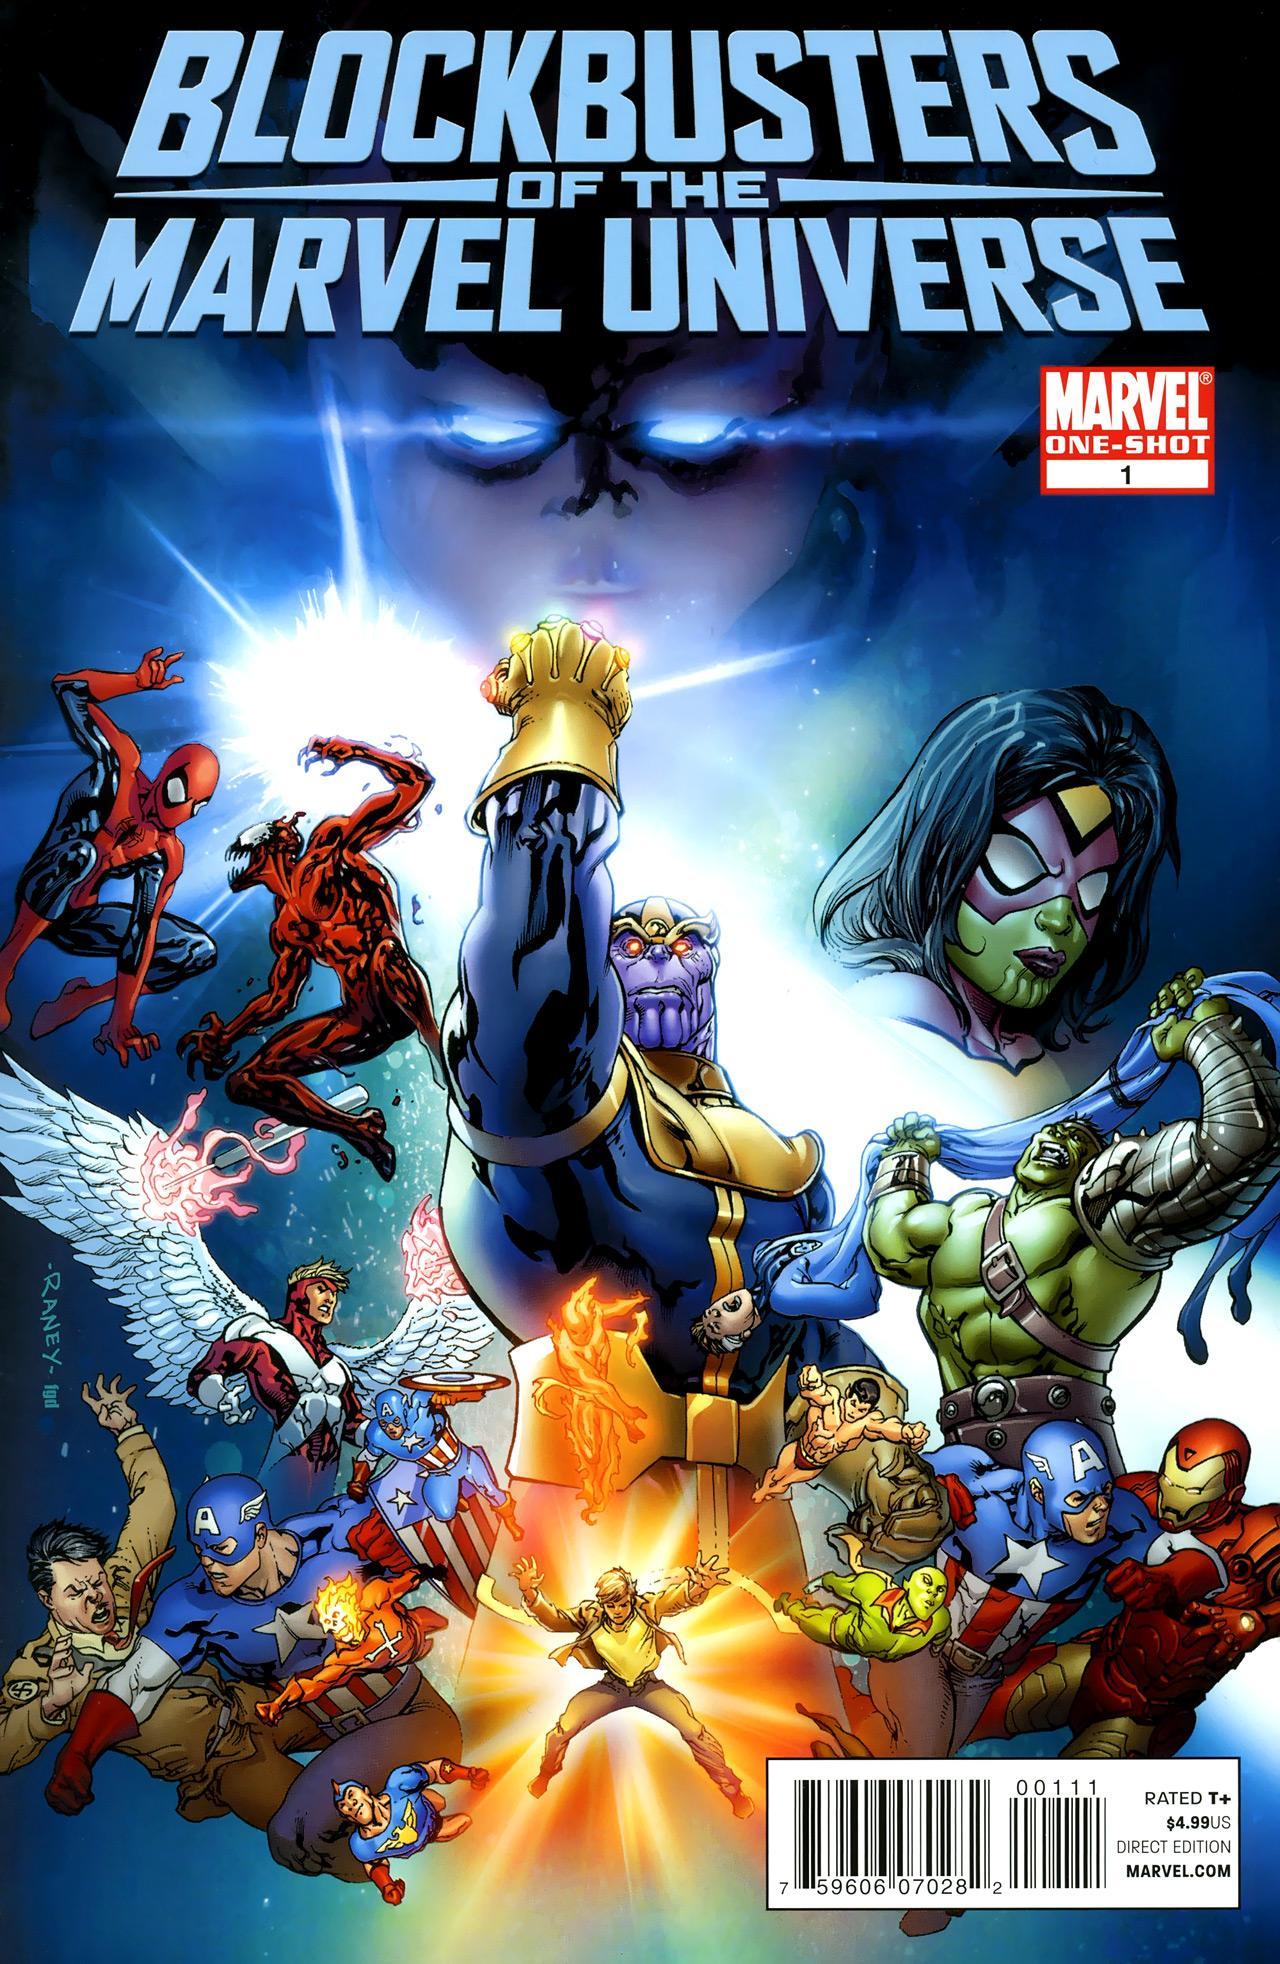 Blockbusters of the Marvel Universe Vol. 1 #1